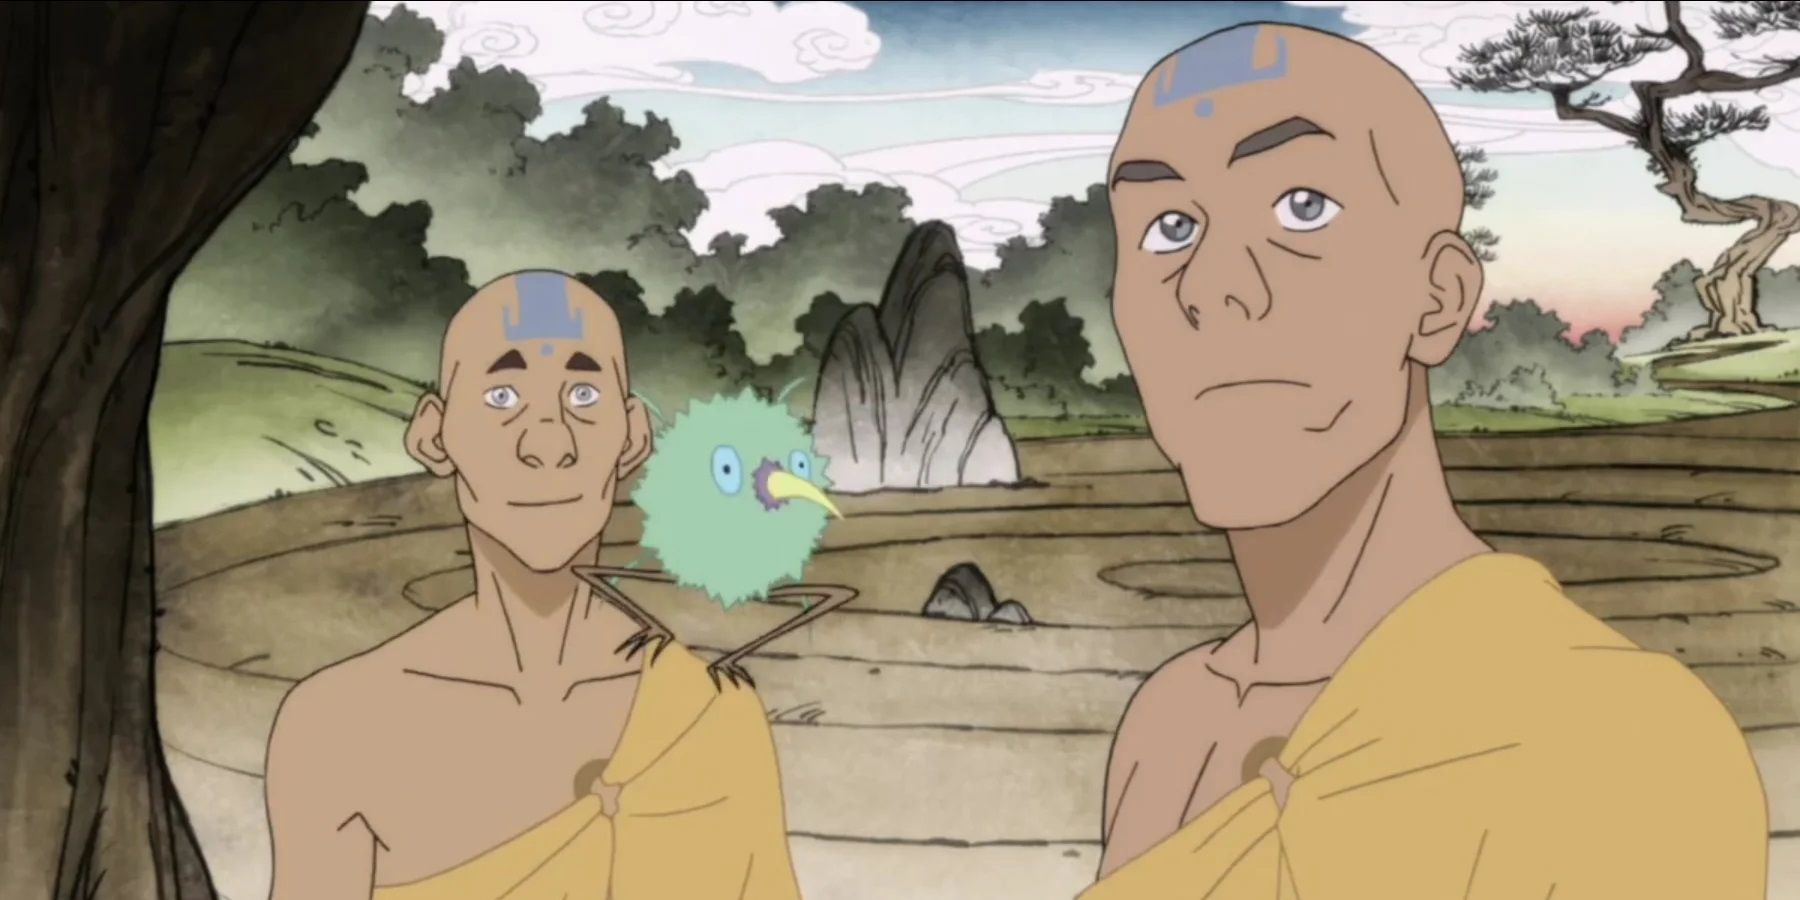 Avatars Airbender Tattoos Have A Major Cultural Significance 9994